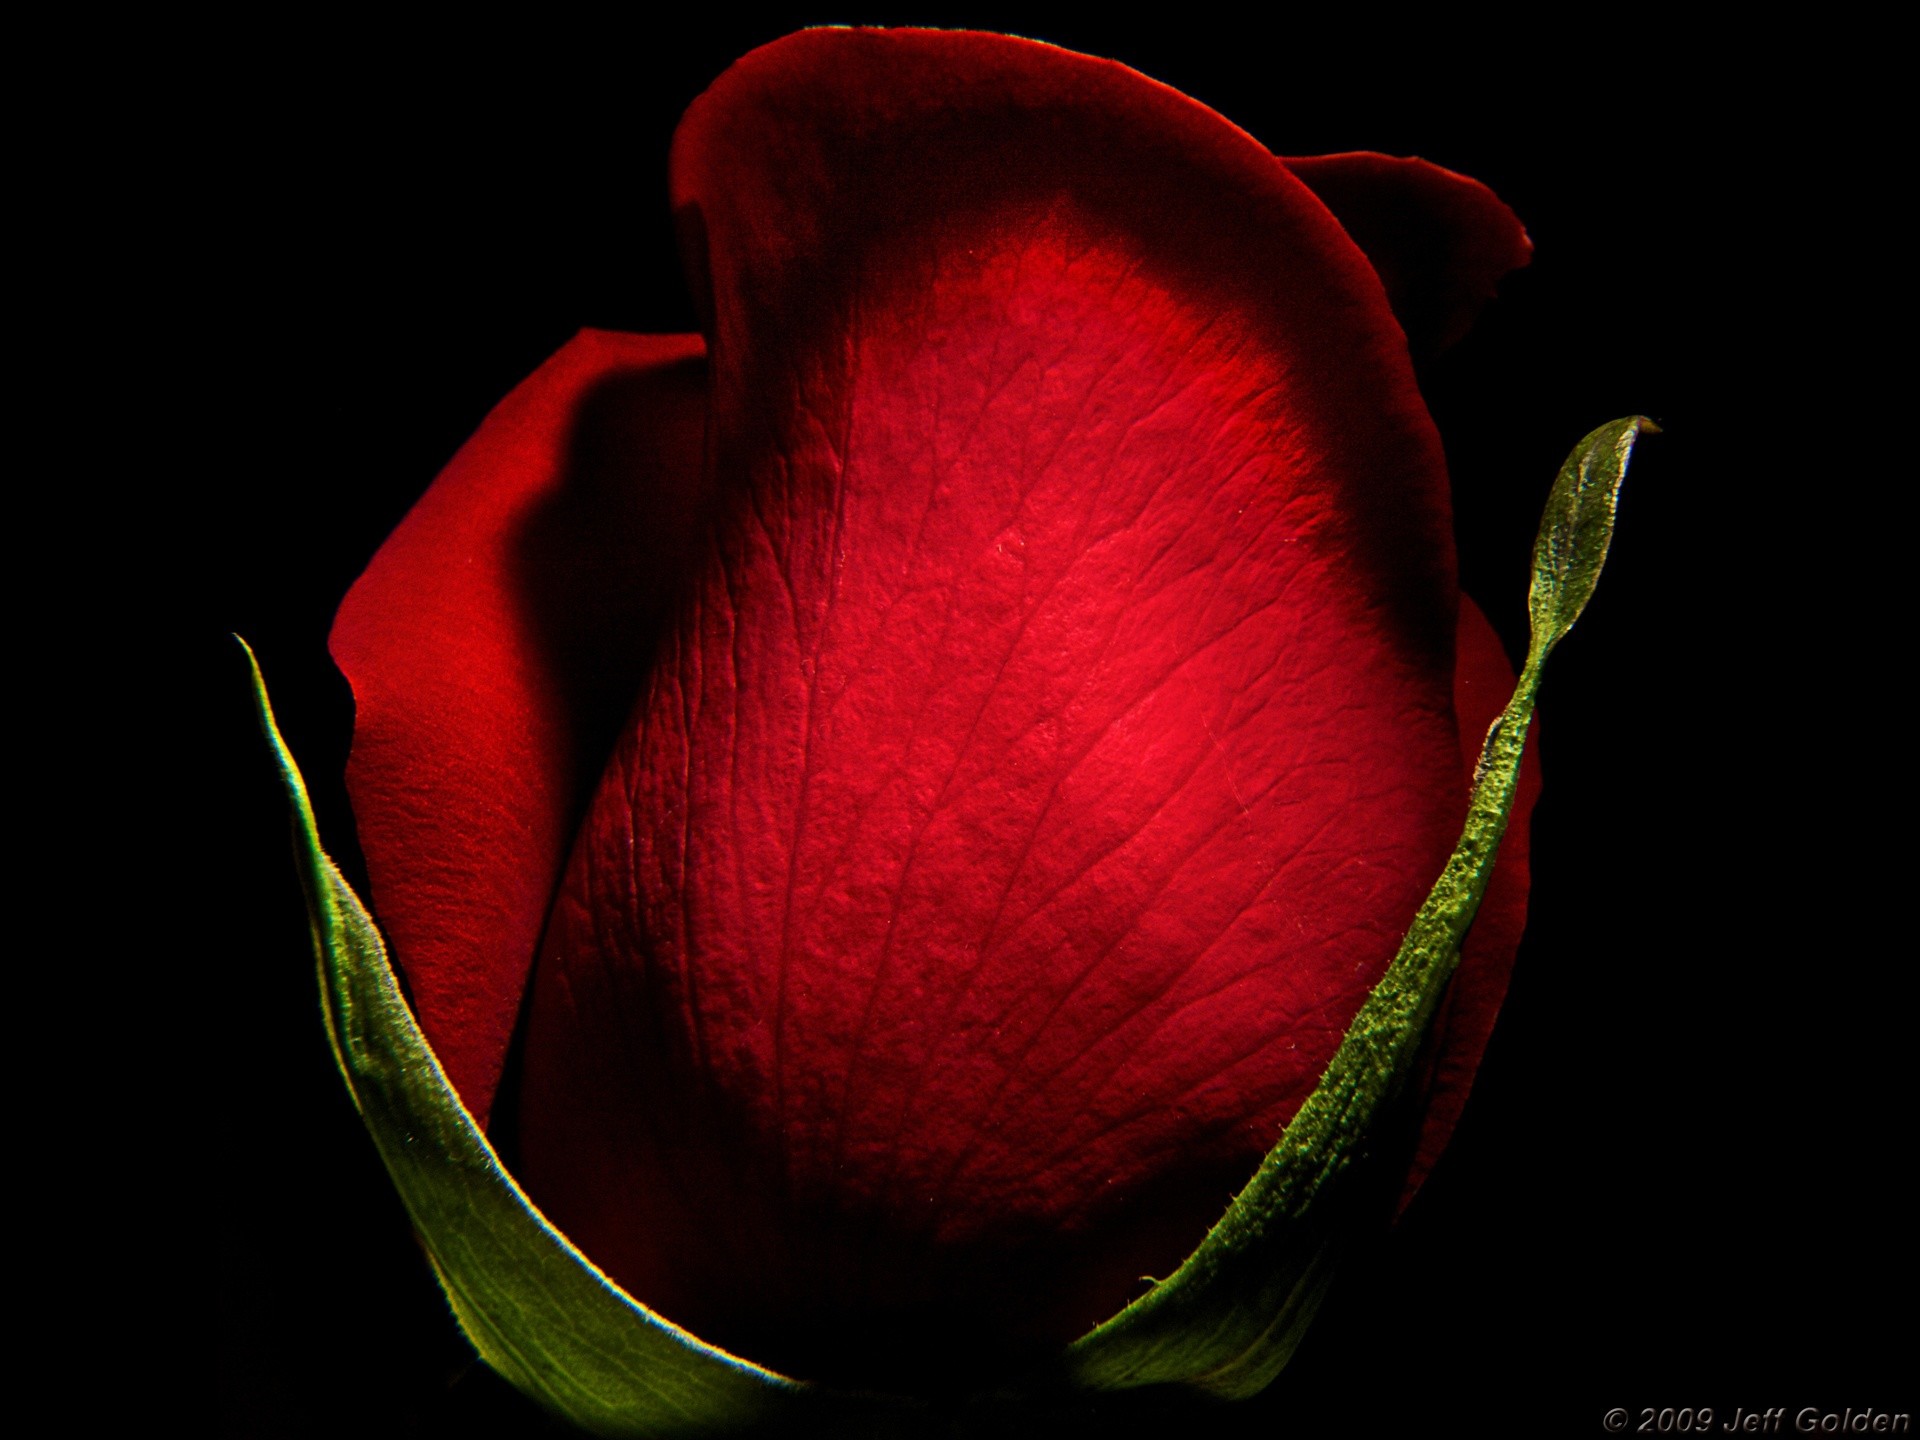 1920x1440 Red Rose desktop wallpapers 800x600, Red Rose backgrounds 800x600 .